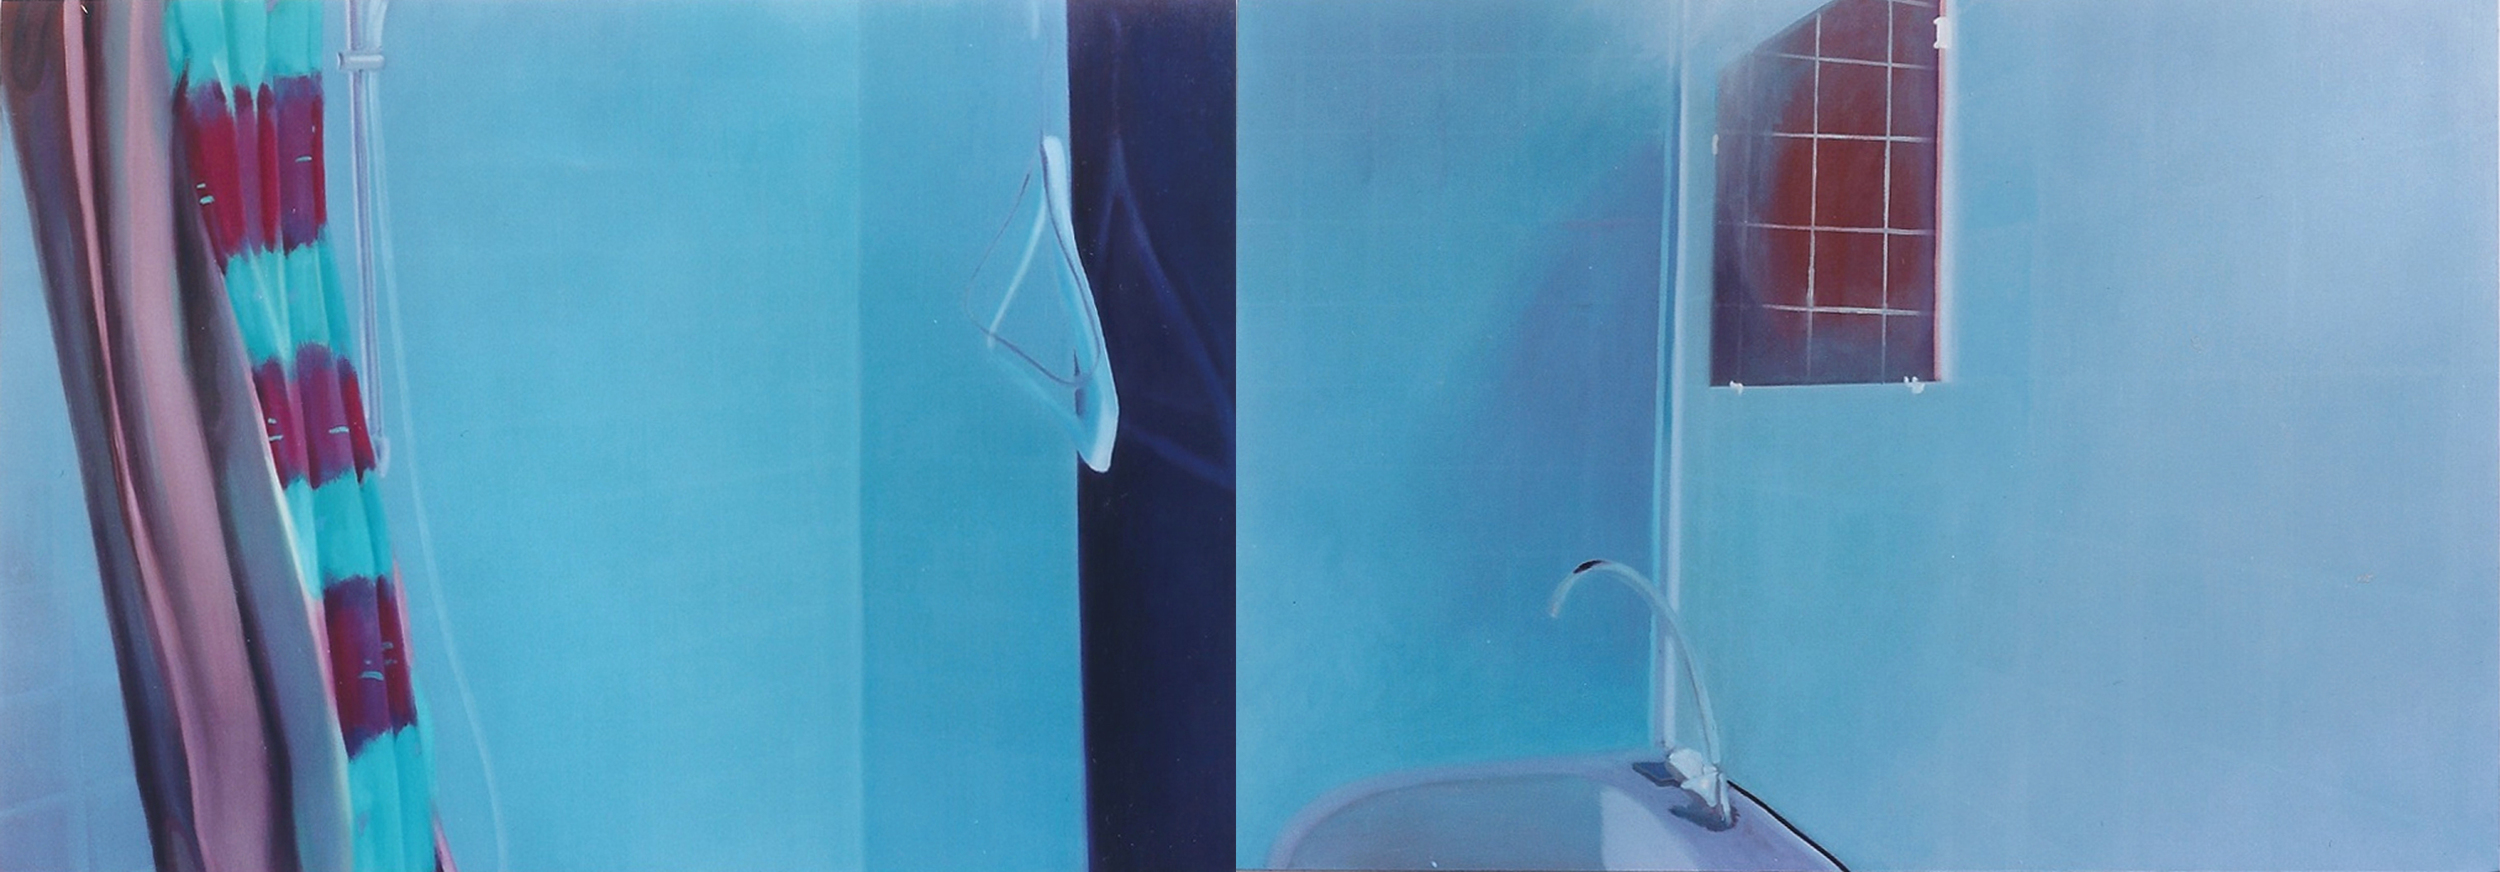   Untitled (bathroom) , 1999, oil on canvas, 96 x 324cm (diptych). Private collection, France 